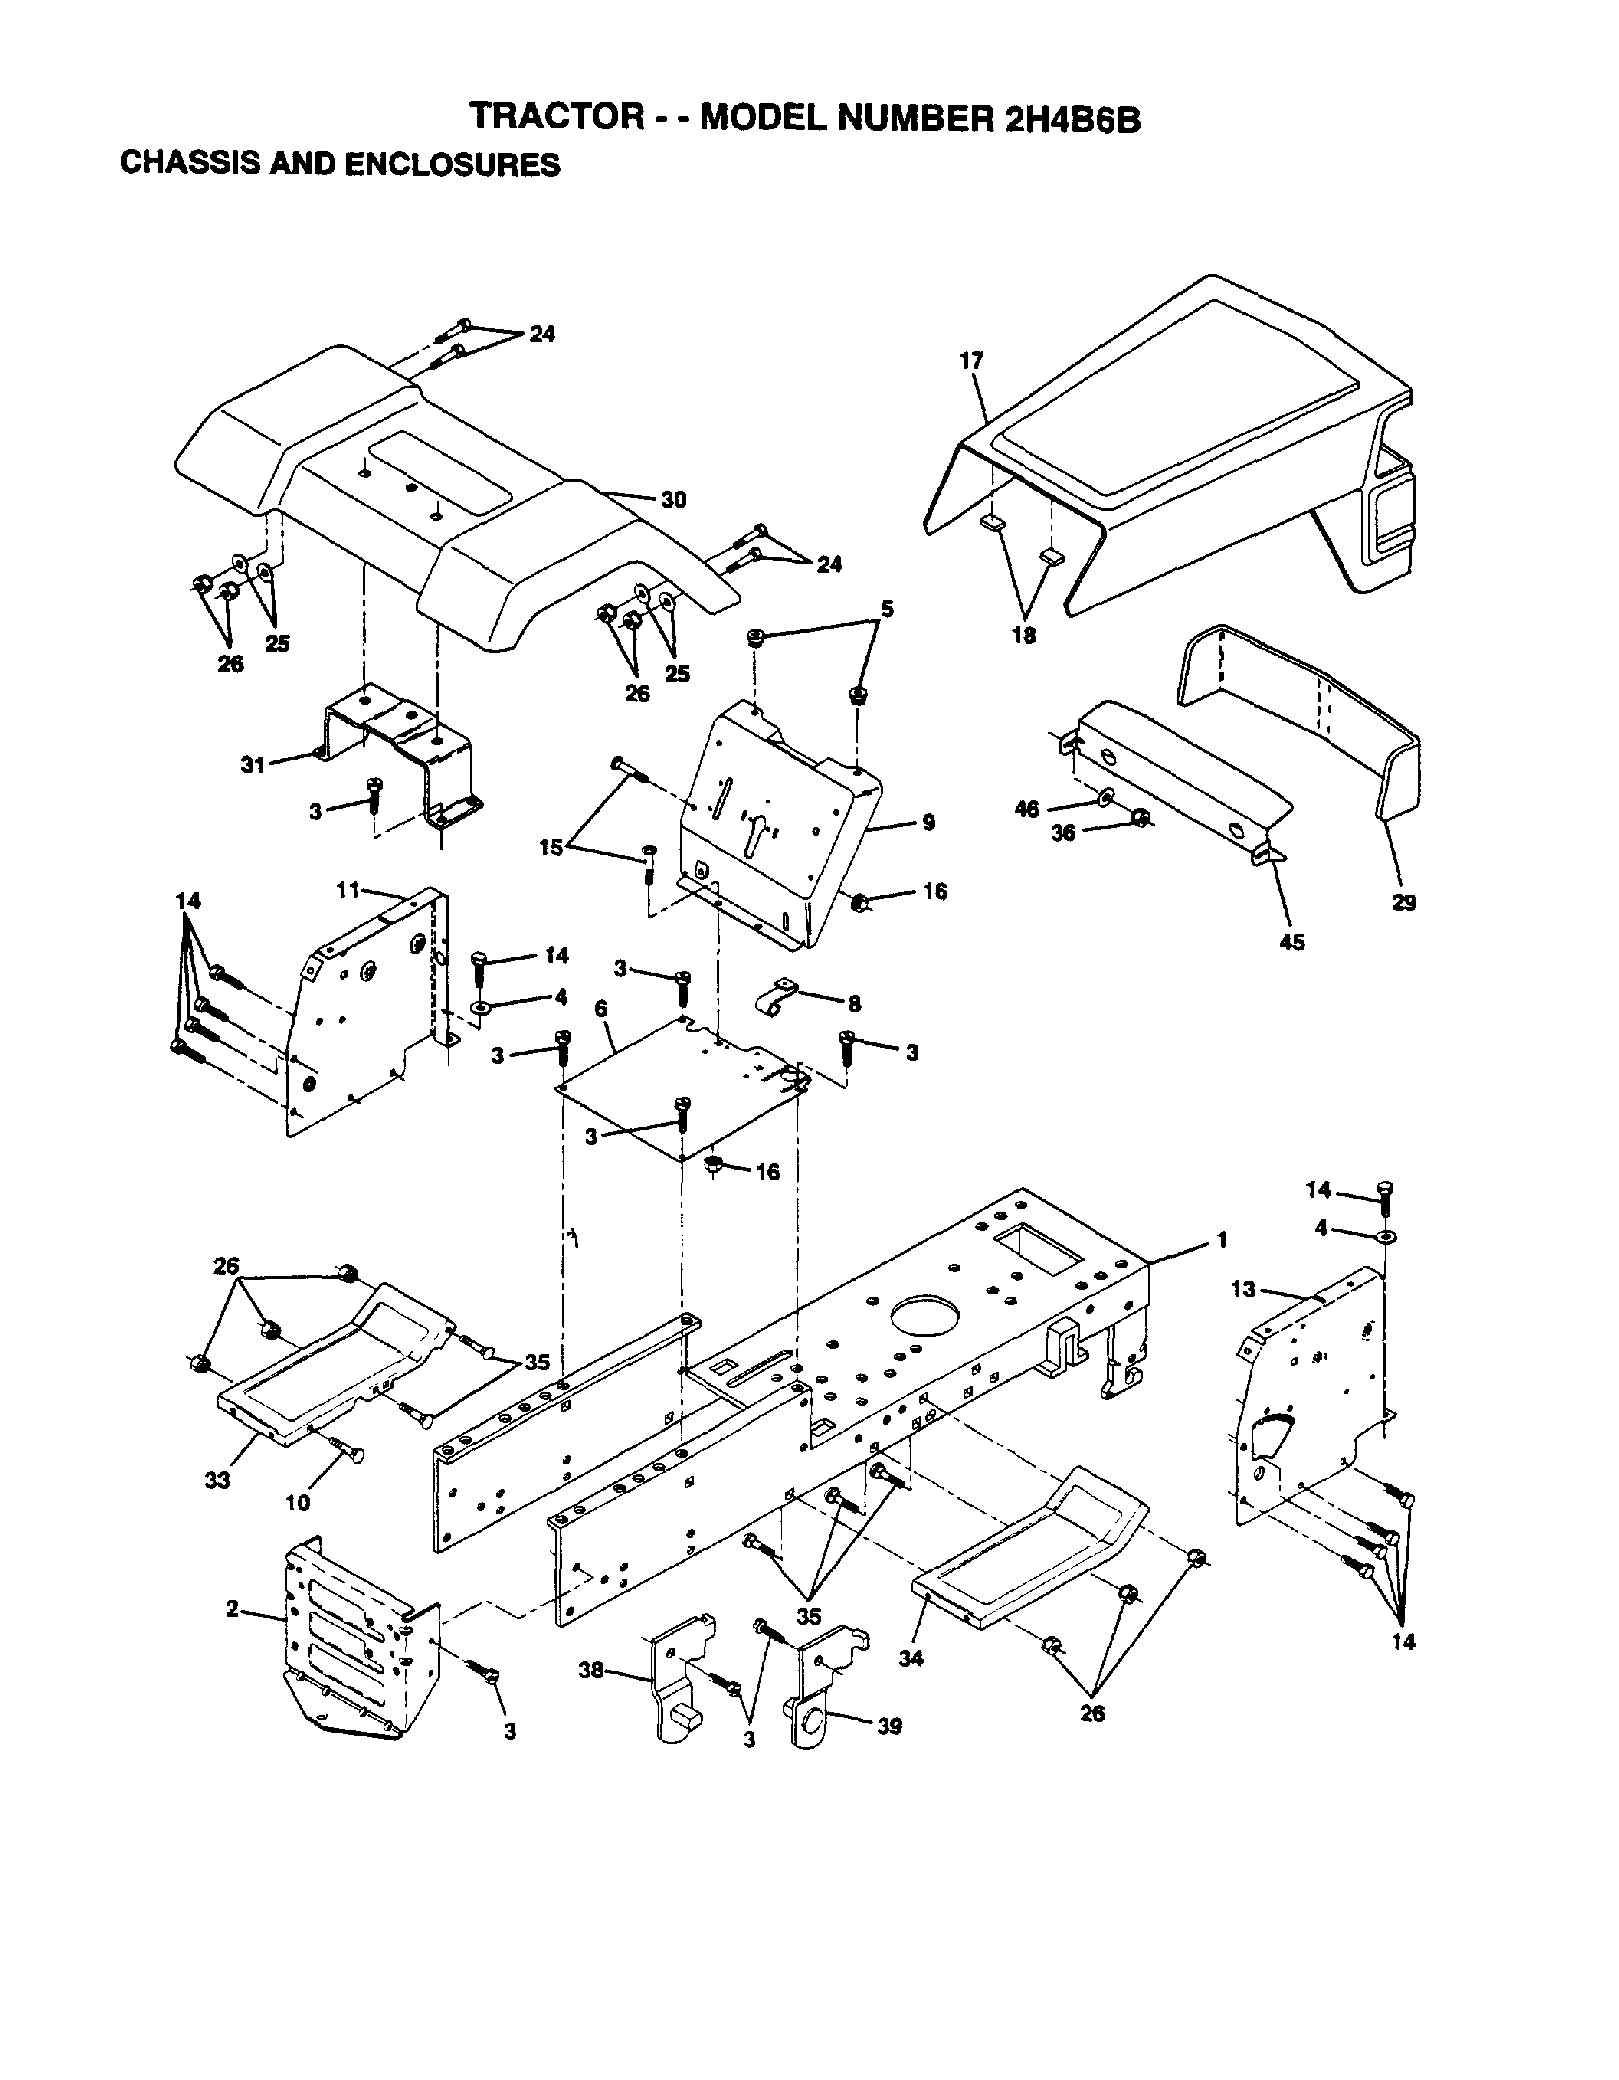 Chassis and appendix 532145501, 532145009, 817490612, 819131216, 532146077, 532155923, 532126471, , 872140608, 532174996, 532124031, 596564001, 874180512, 873310500, , 532164655, 596564401, 734117201, 532062336, 532133805, , 532136619, 532105476, , 596136001, 532108067, 532139886, 532139887, 532132257417, 532127316, 532005479